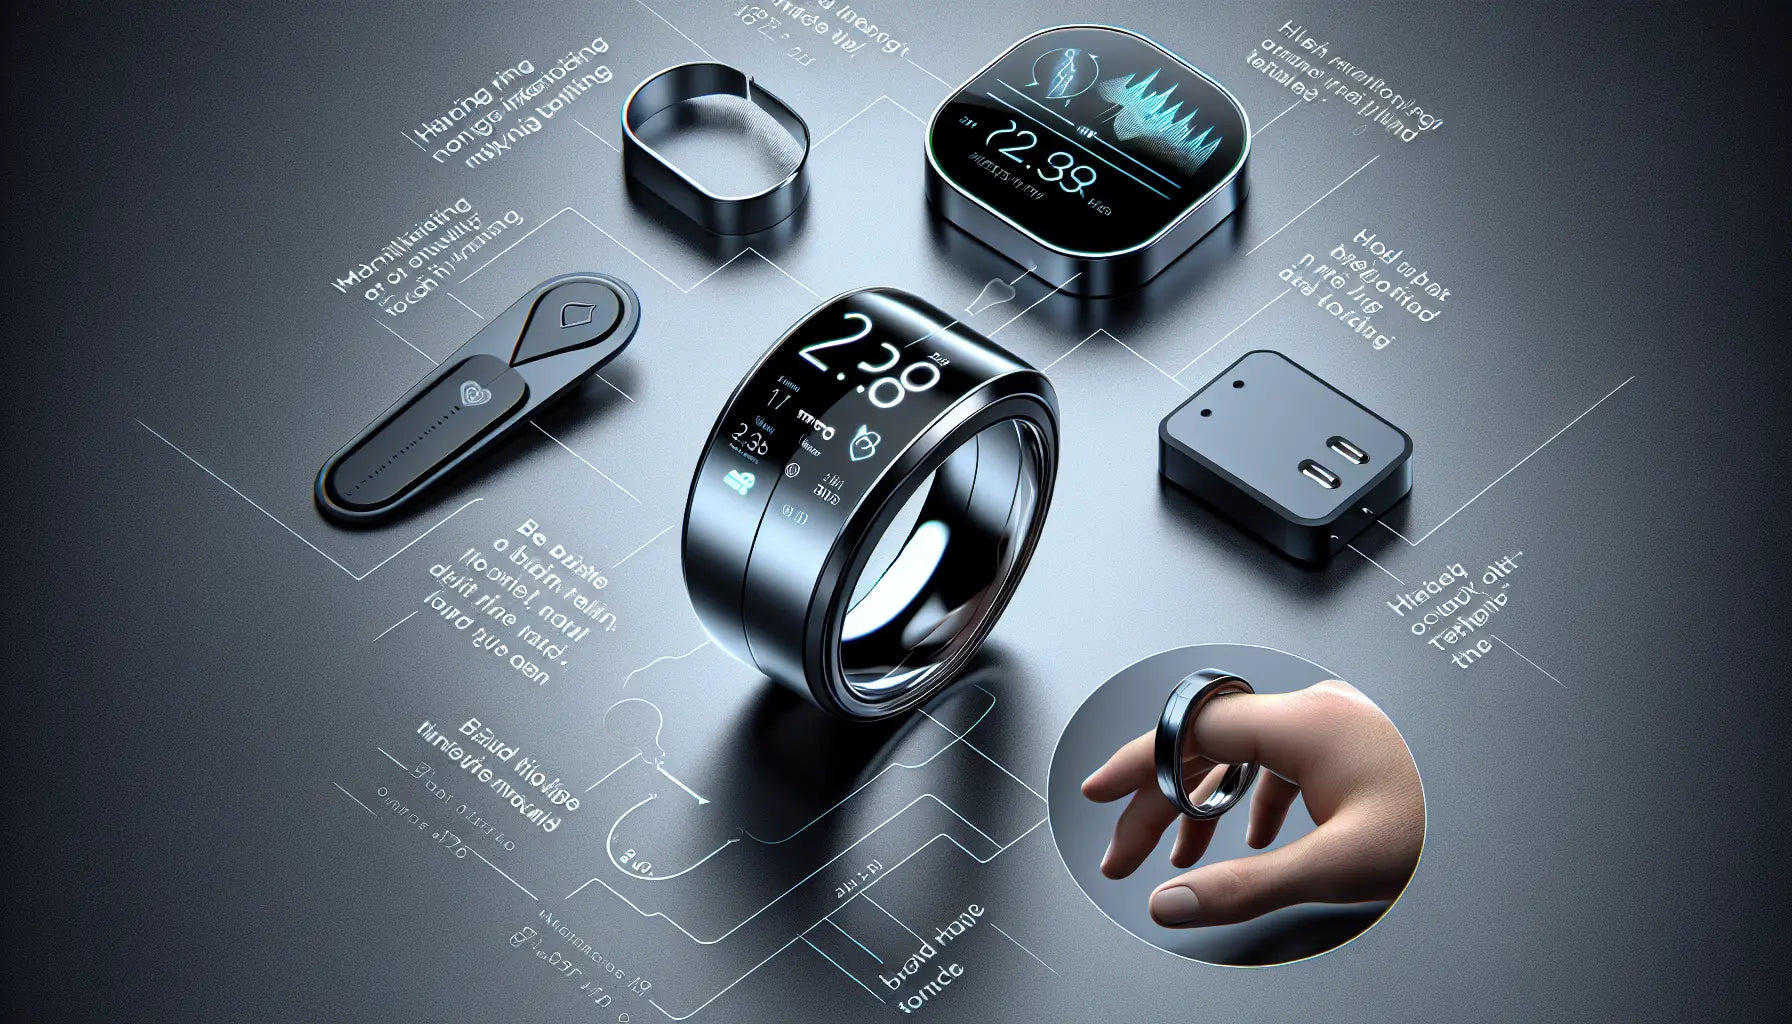 Black Shark Smart Ring: A Game-Changer with 180 Days of Battery Life